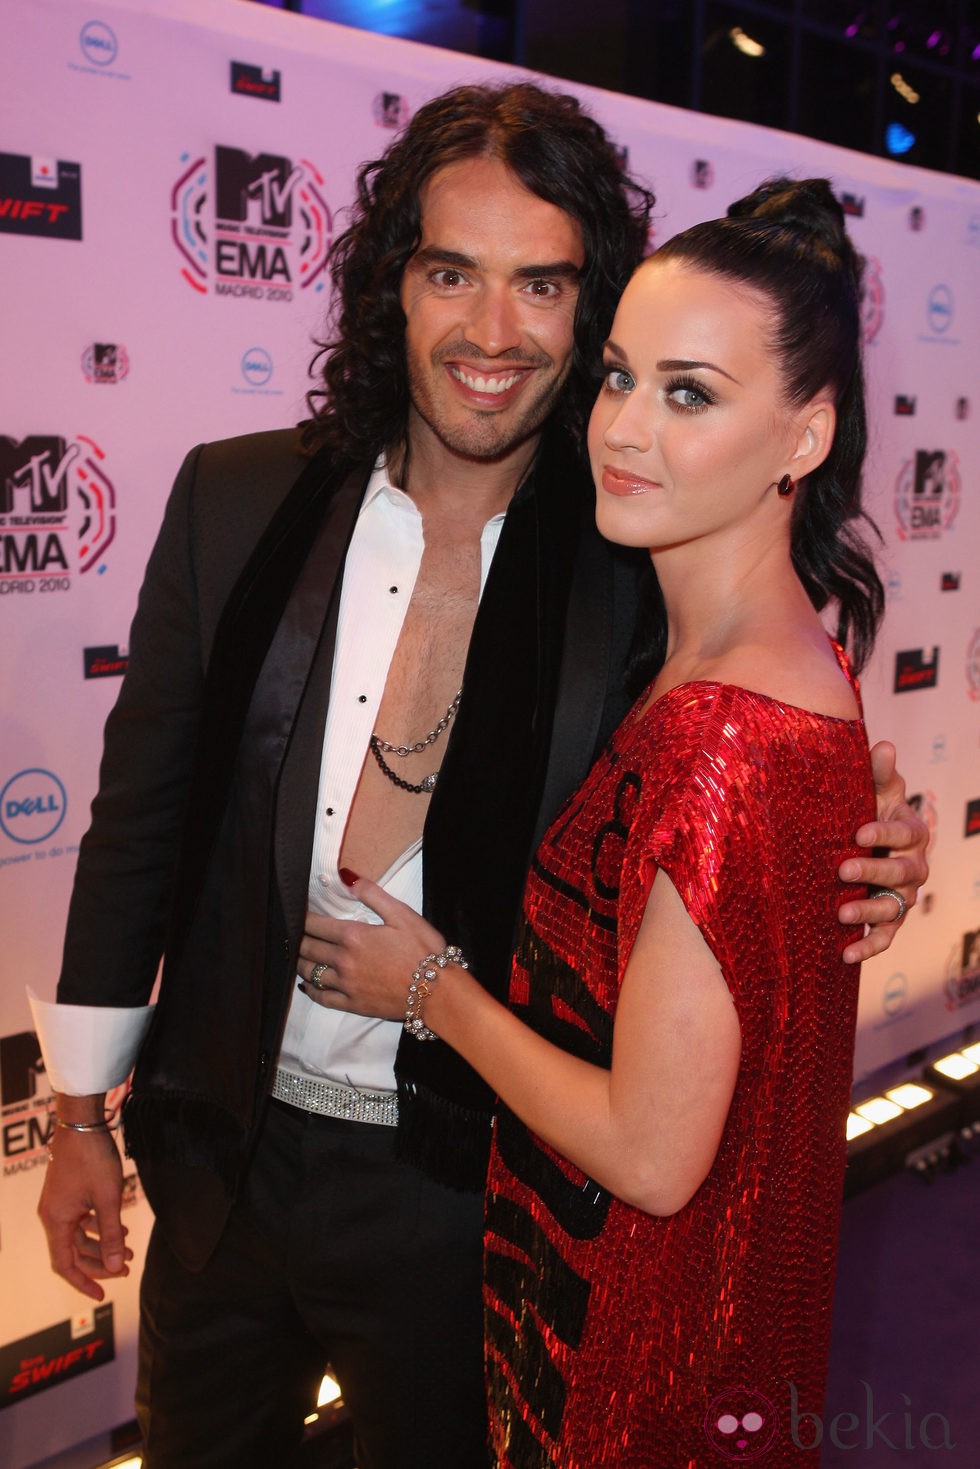 Katy Perry y Russell Brand muy acaramelados